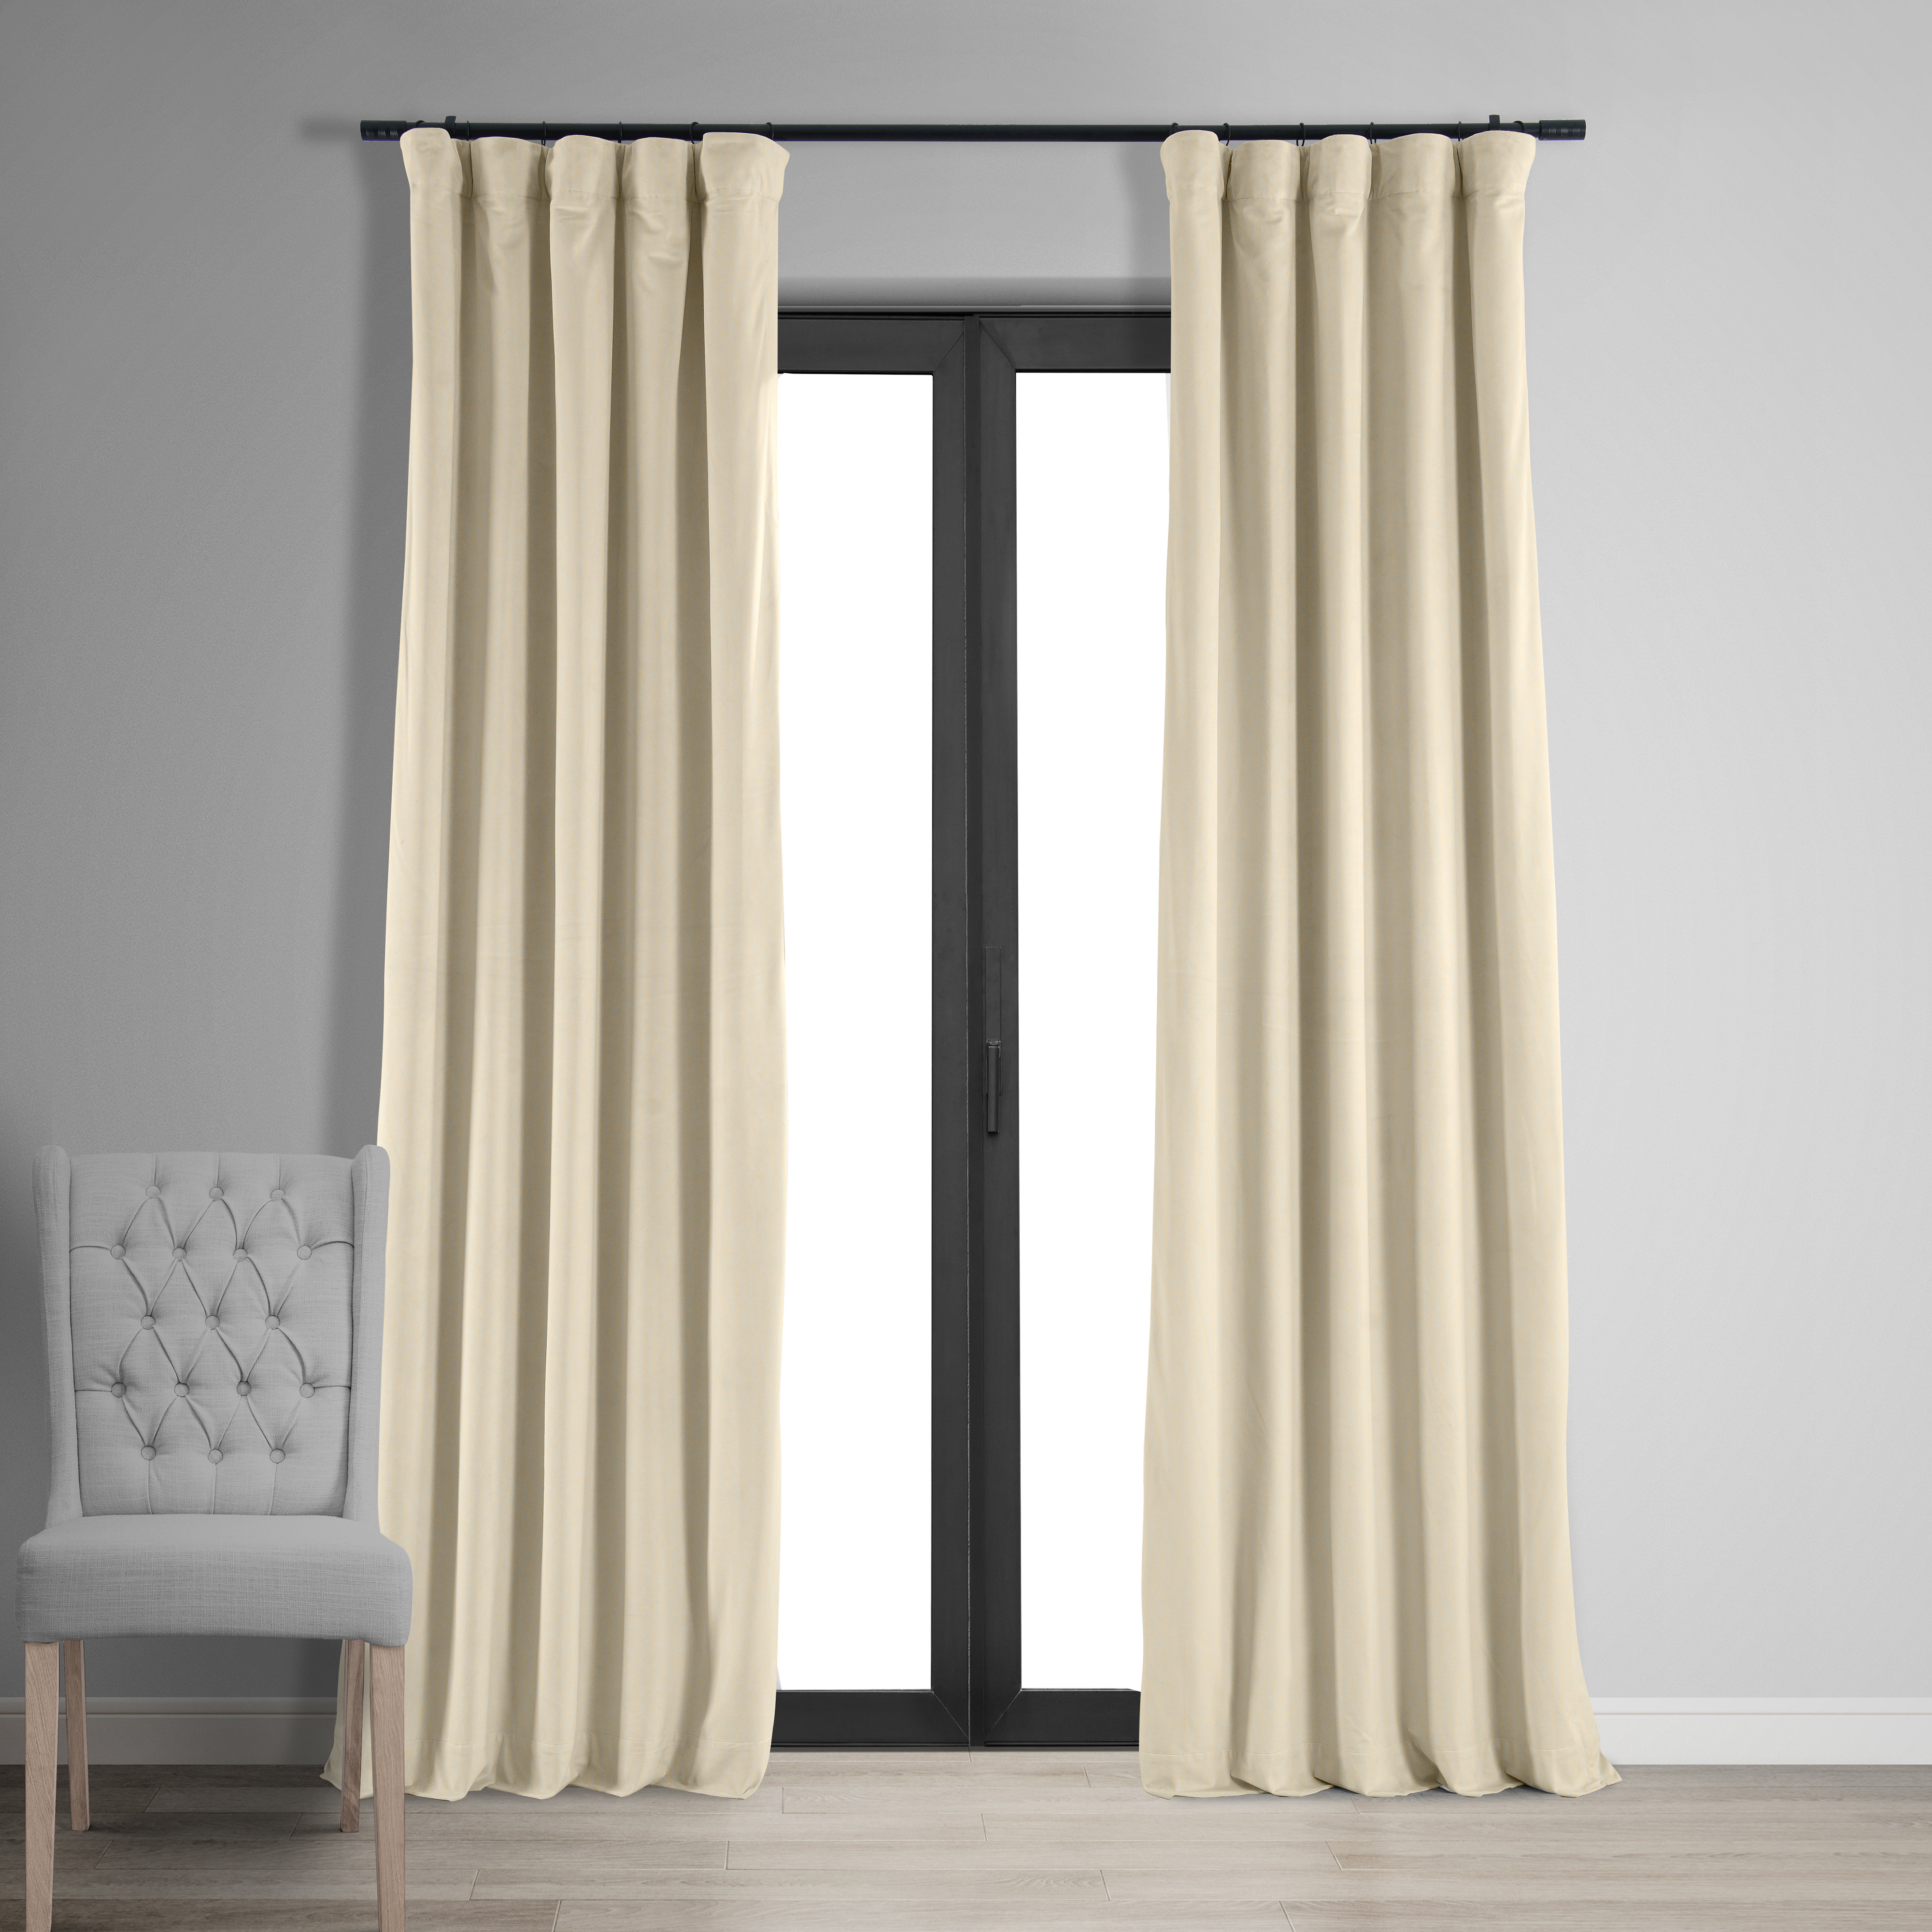 Double pinch pleat curtains - Distinct Interiors By Carly